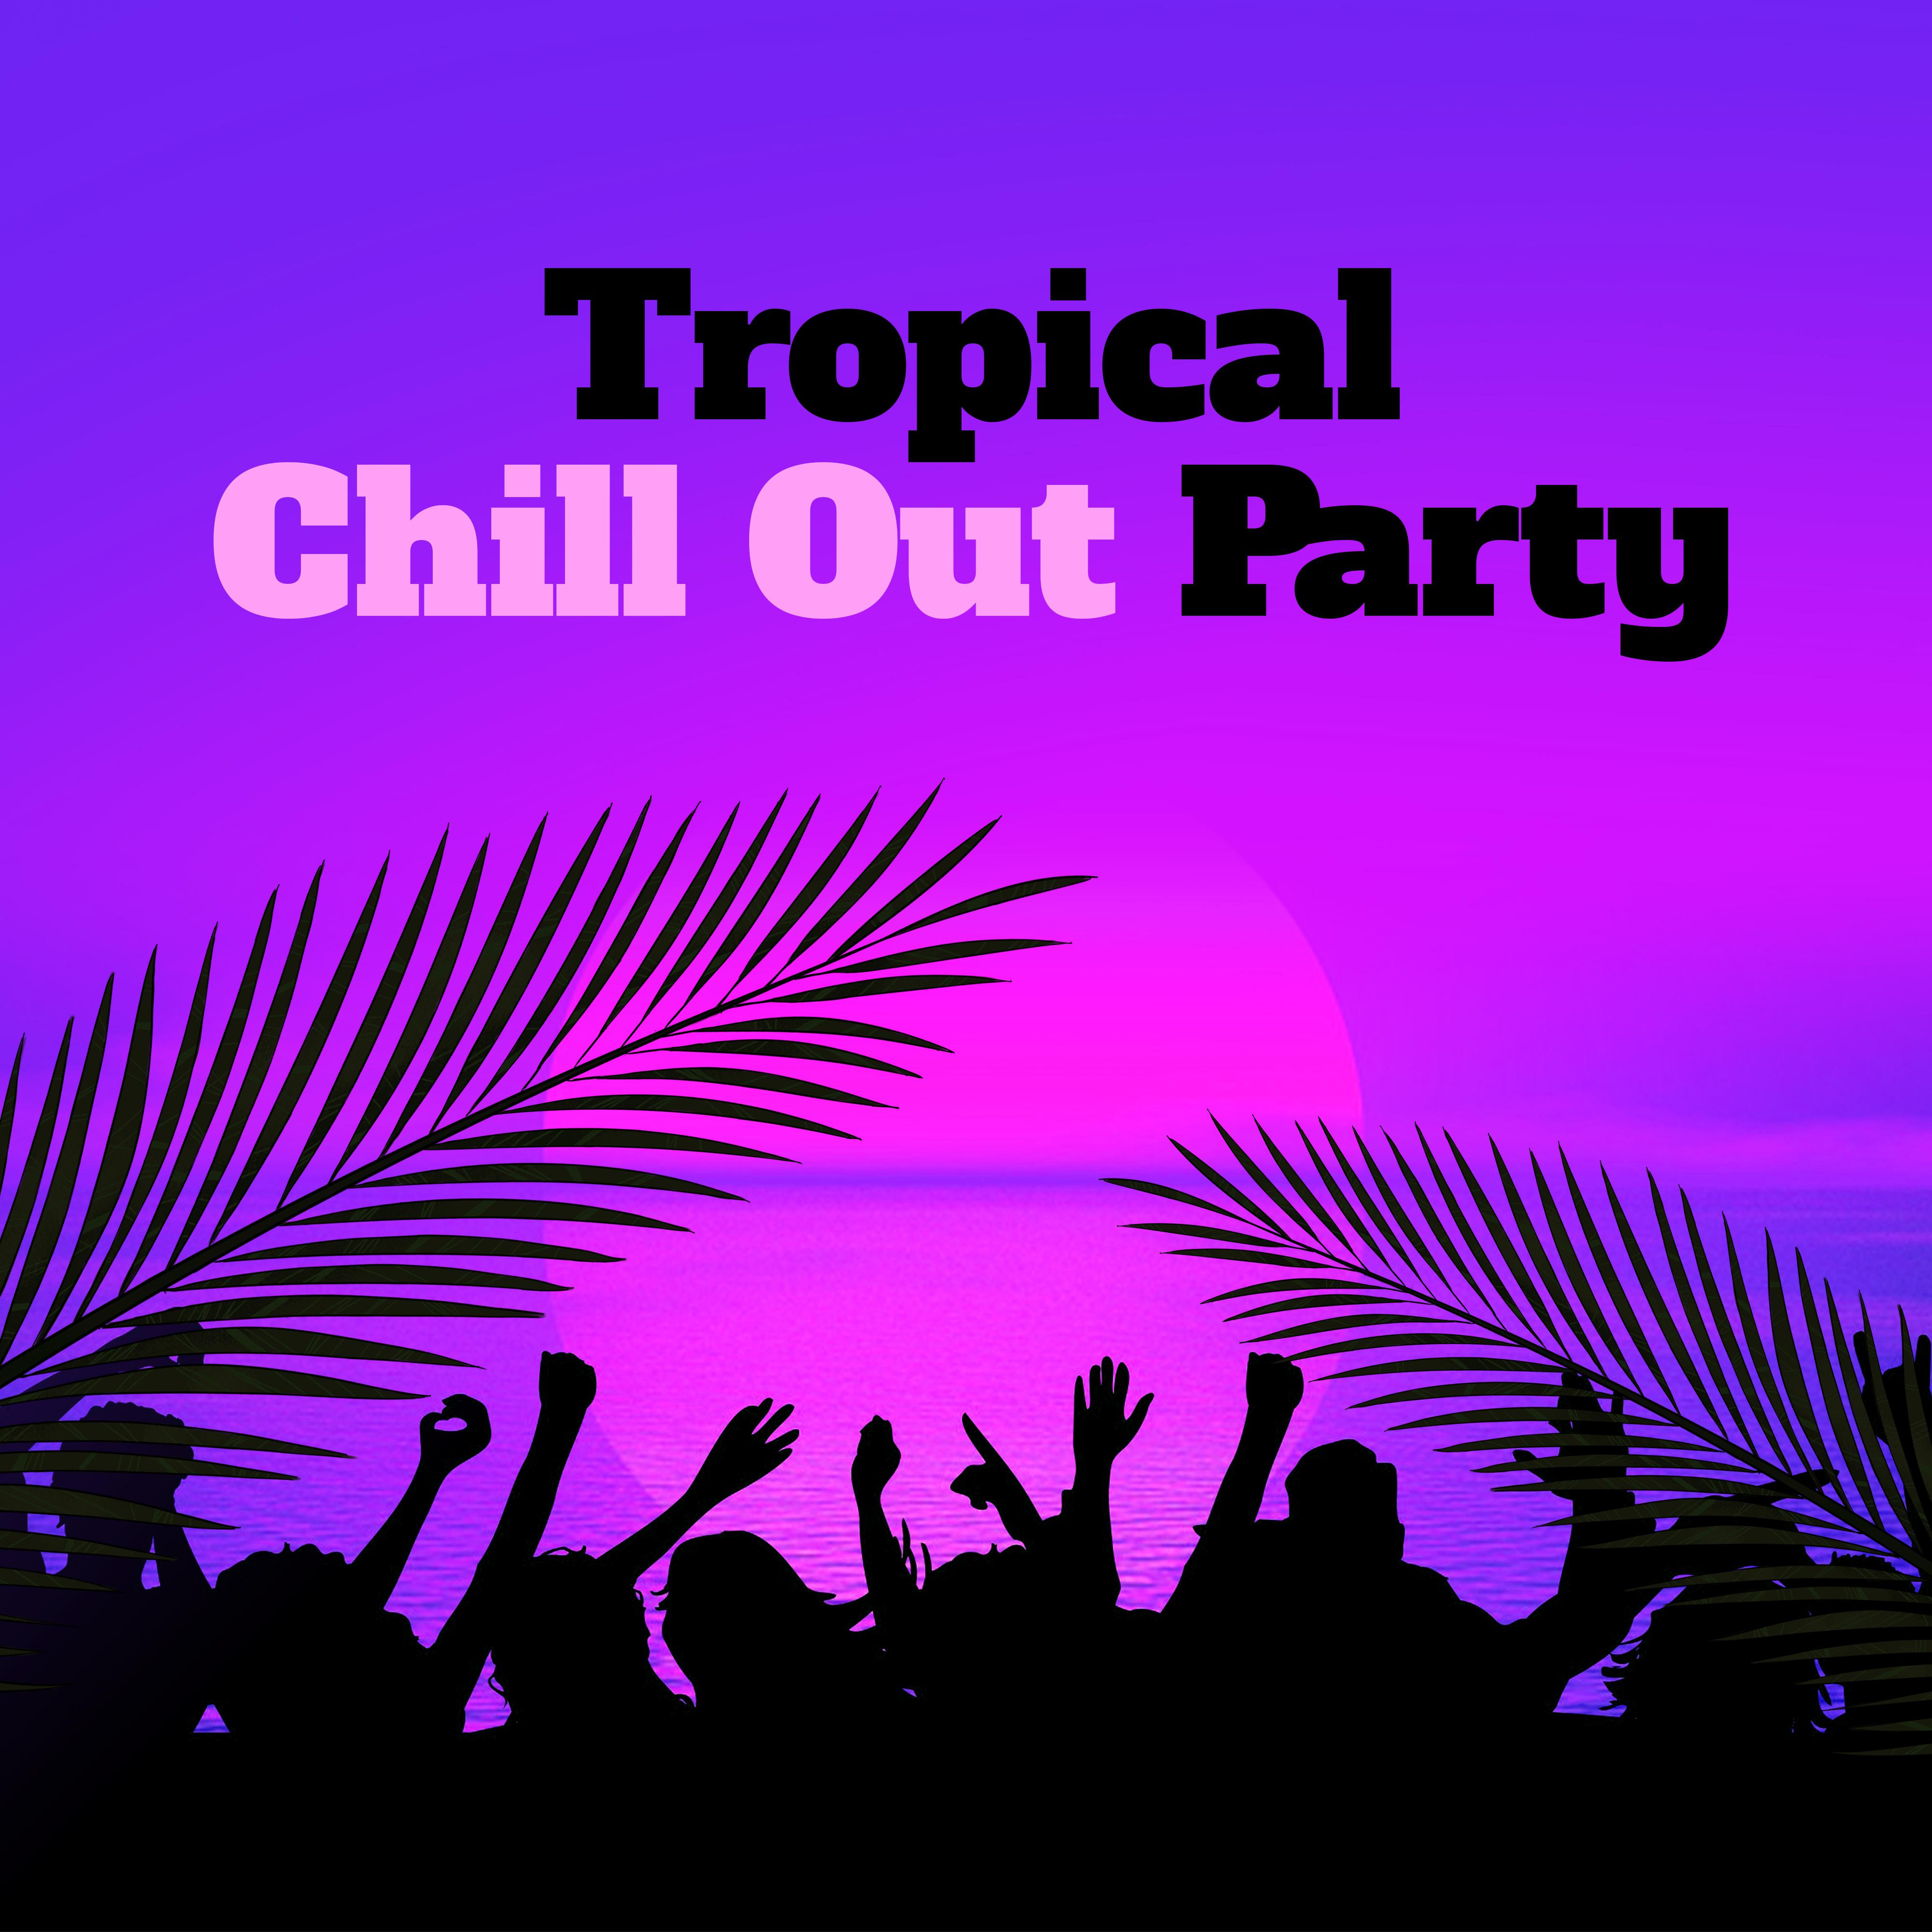 Tropical Chill Out Party  Bora Bora Beach Party, Evening Songs, Dance Night, Island Chill Out 2017